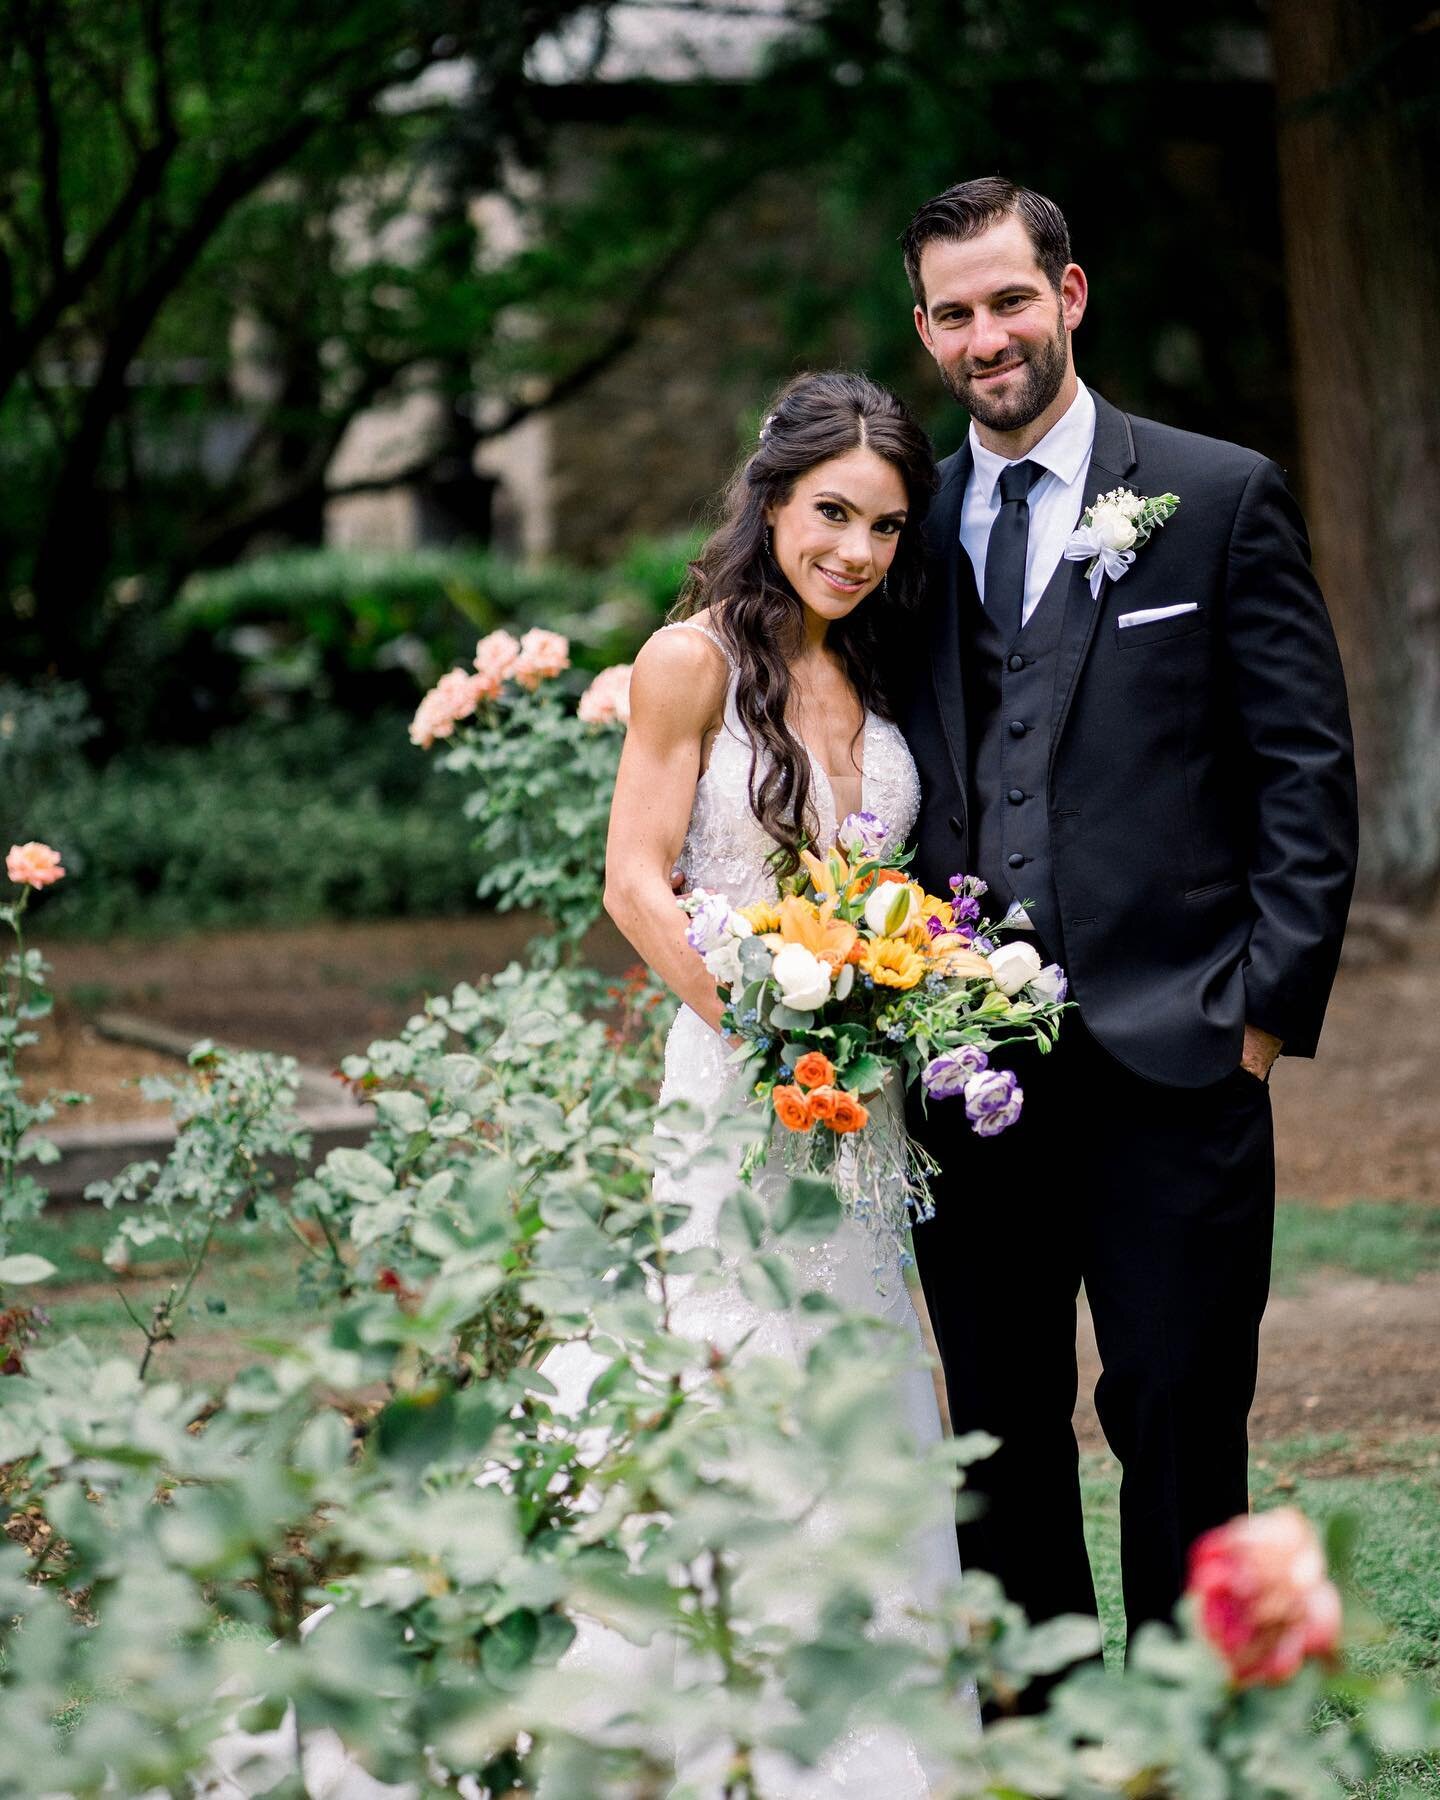 This wedding last year in May was so much fun! Brittany and Zak had their first look at the Rose Garden in Raleigh, NC. The ceremony and reception were @sageroomraleigh sageroomraleigh 
And the after party was @alchemyraleigh till 2 am!
It was amazin